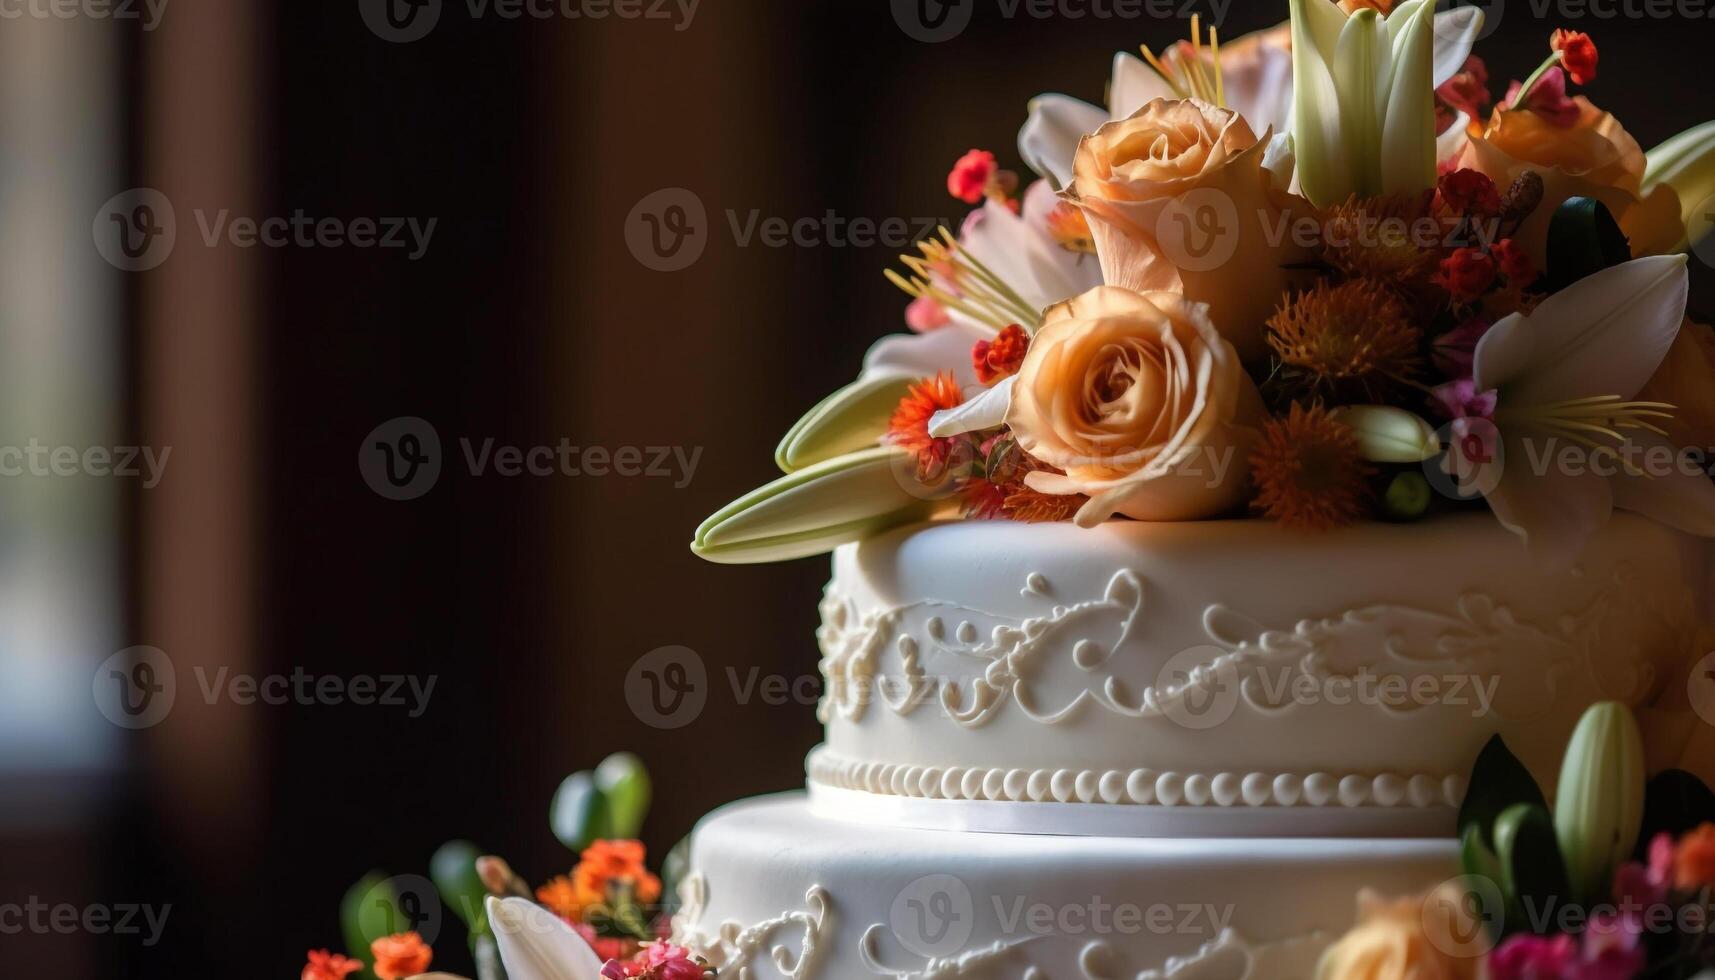 A decadent wedding cake adorned with flowers generated by AI photo